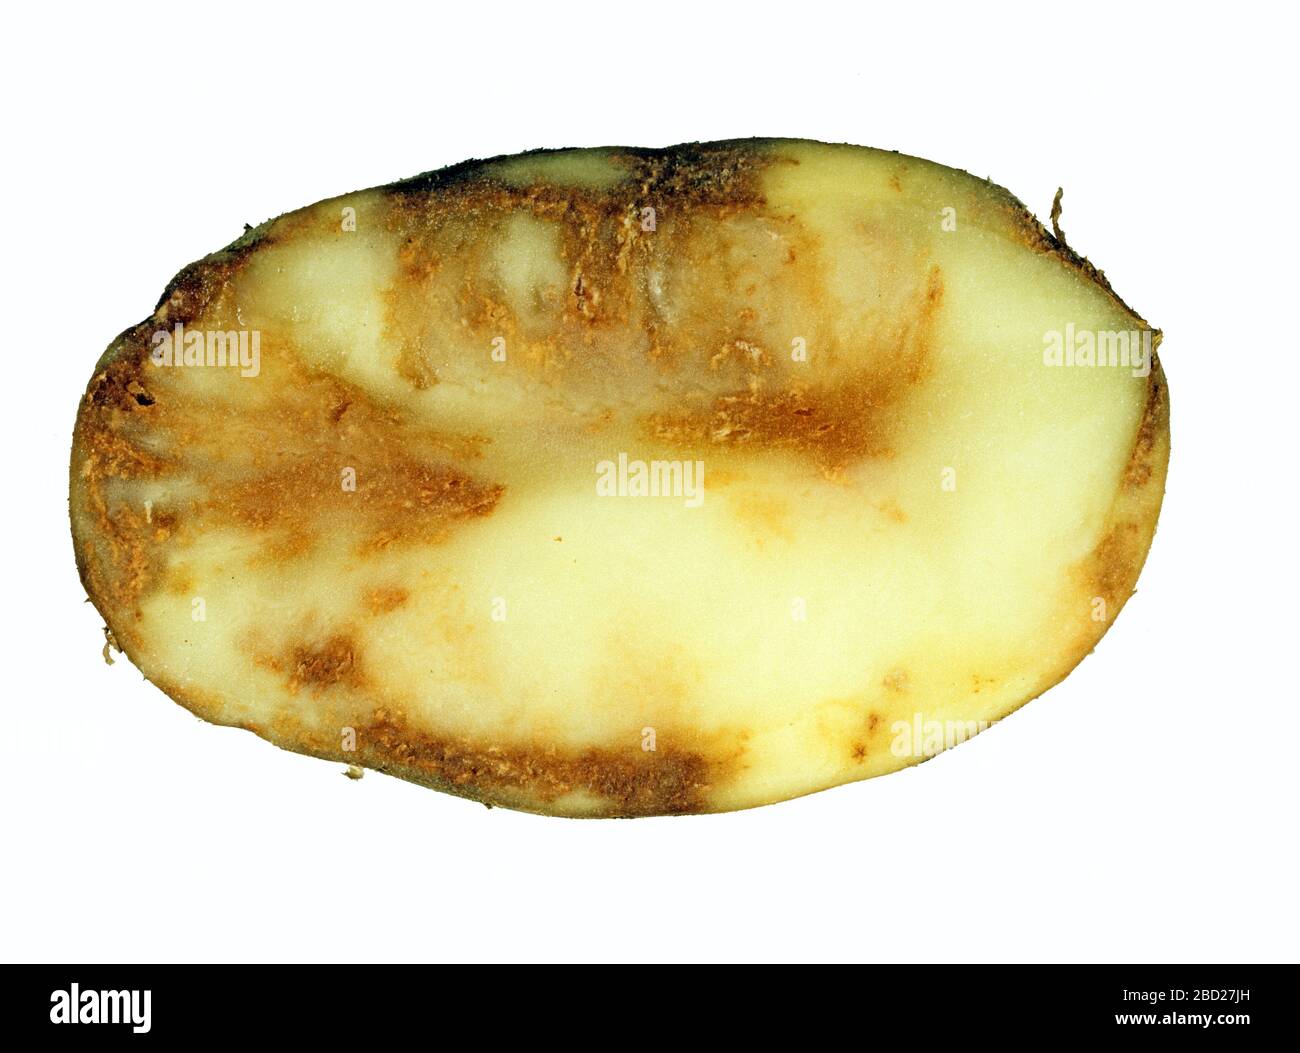 Potato tuber from a crop with late blight (Phtophthora infestans) affect of oomycetel disease infection on the flesh shown in a section Stock Photo